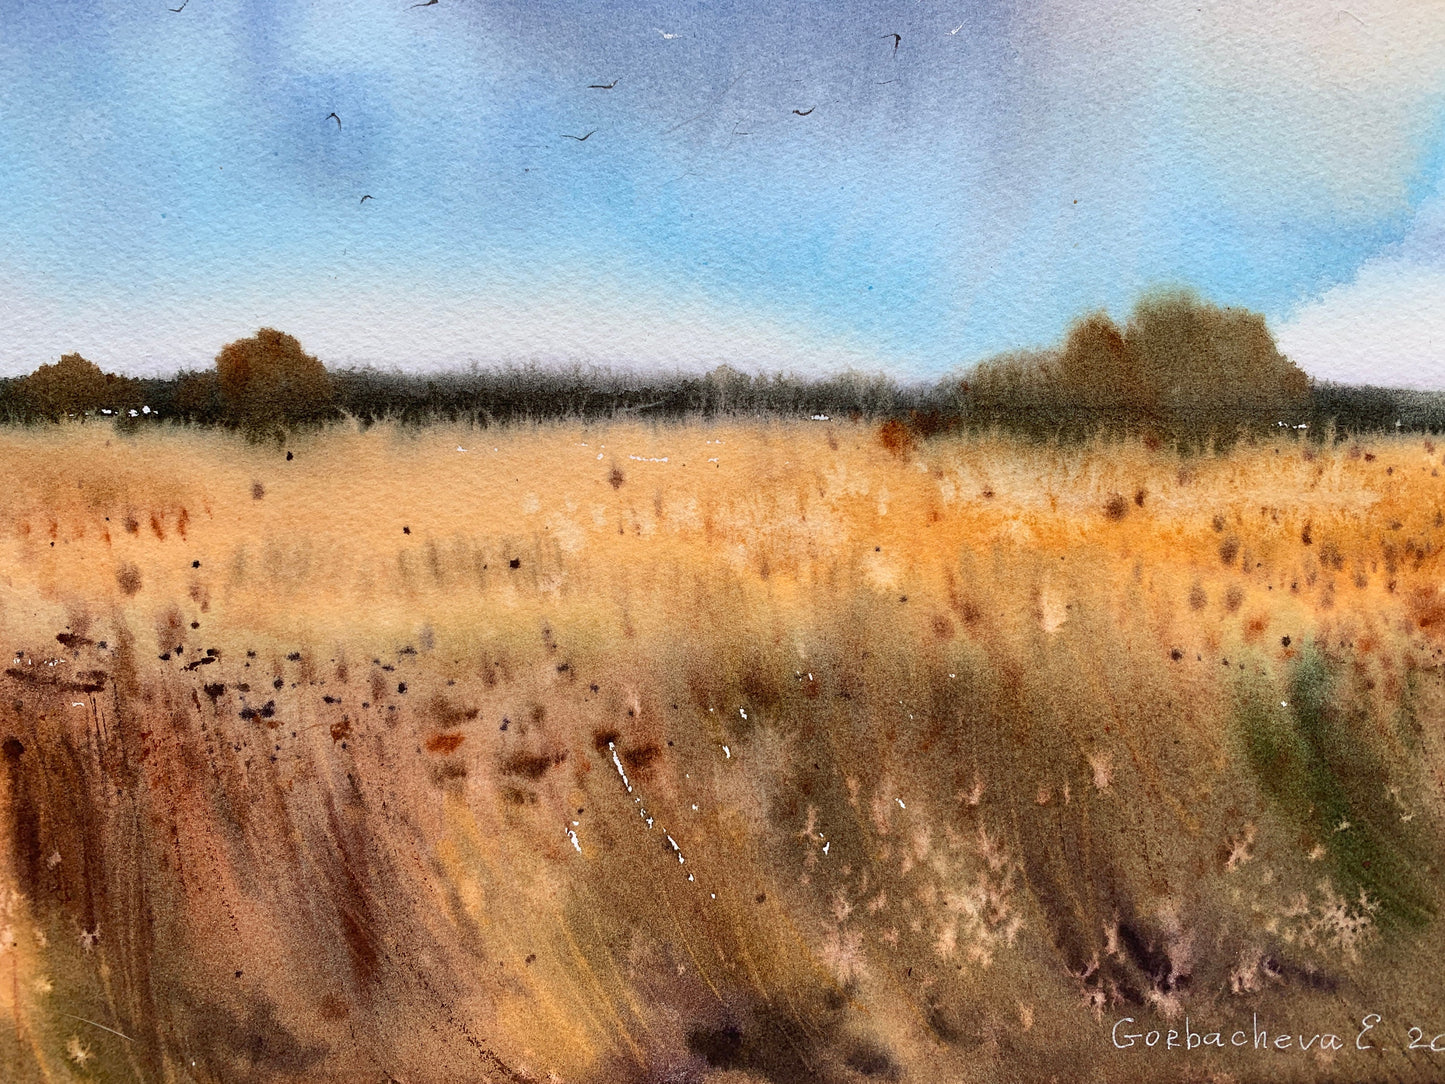 Rye Field Painting, Abstract Watercolor Original, Nature Art, Modern Landscape Wall Decor, Blue Sky, Gift For Art Lovers